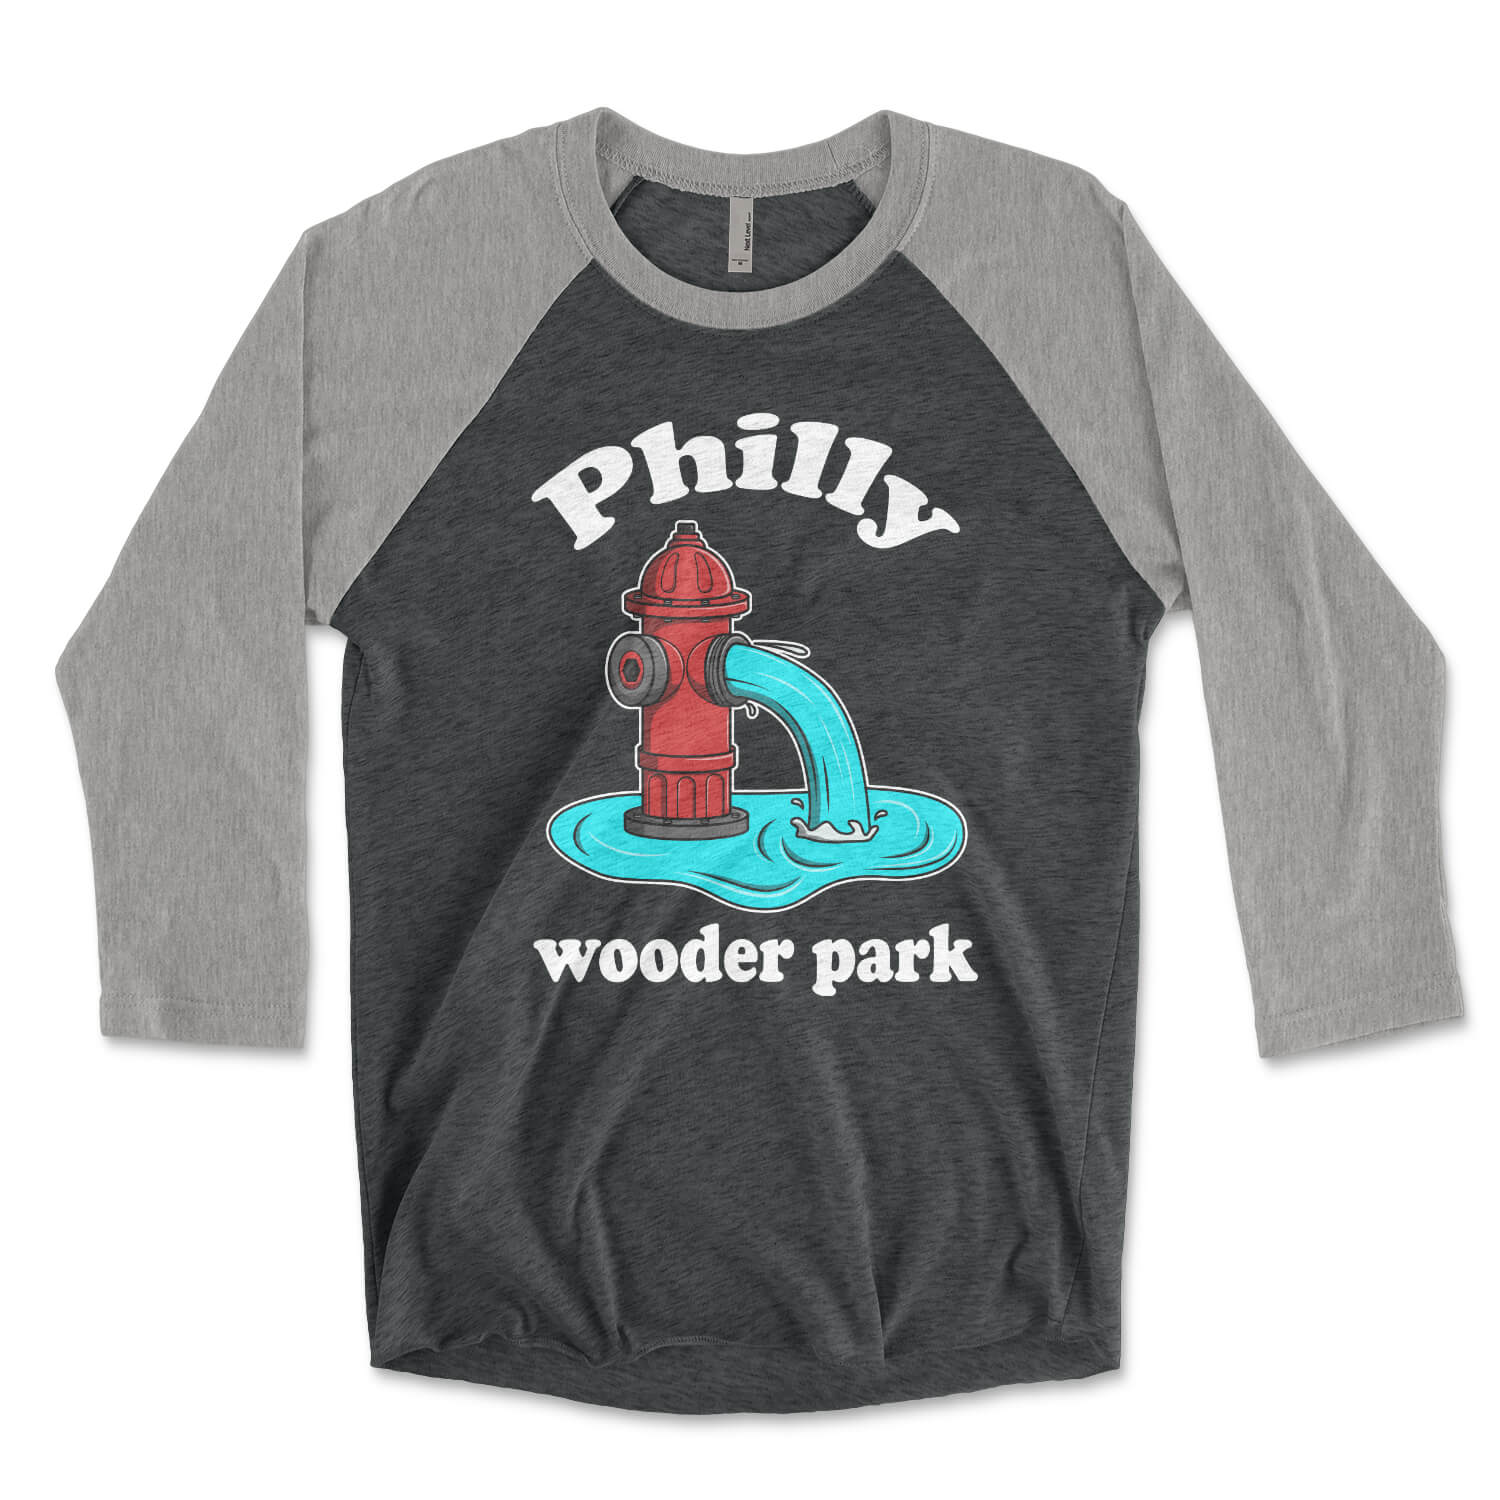 Philadelphia fire hydrant philly wooder park on a grey and black raglan tee shirt from Phillygoat